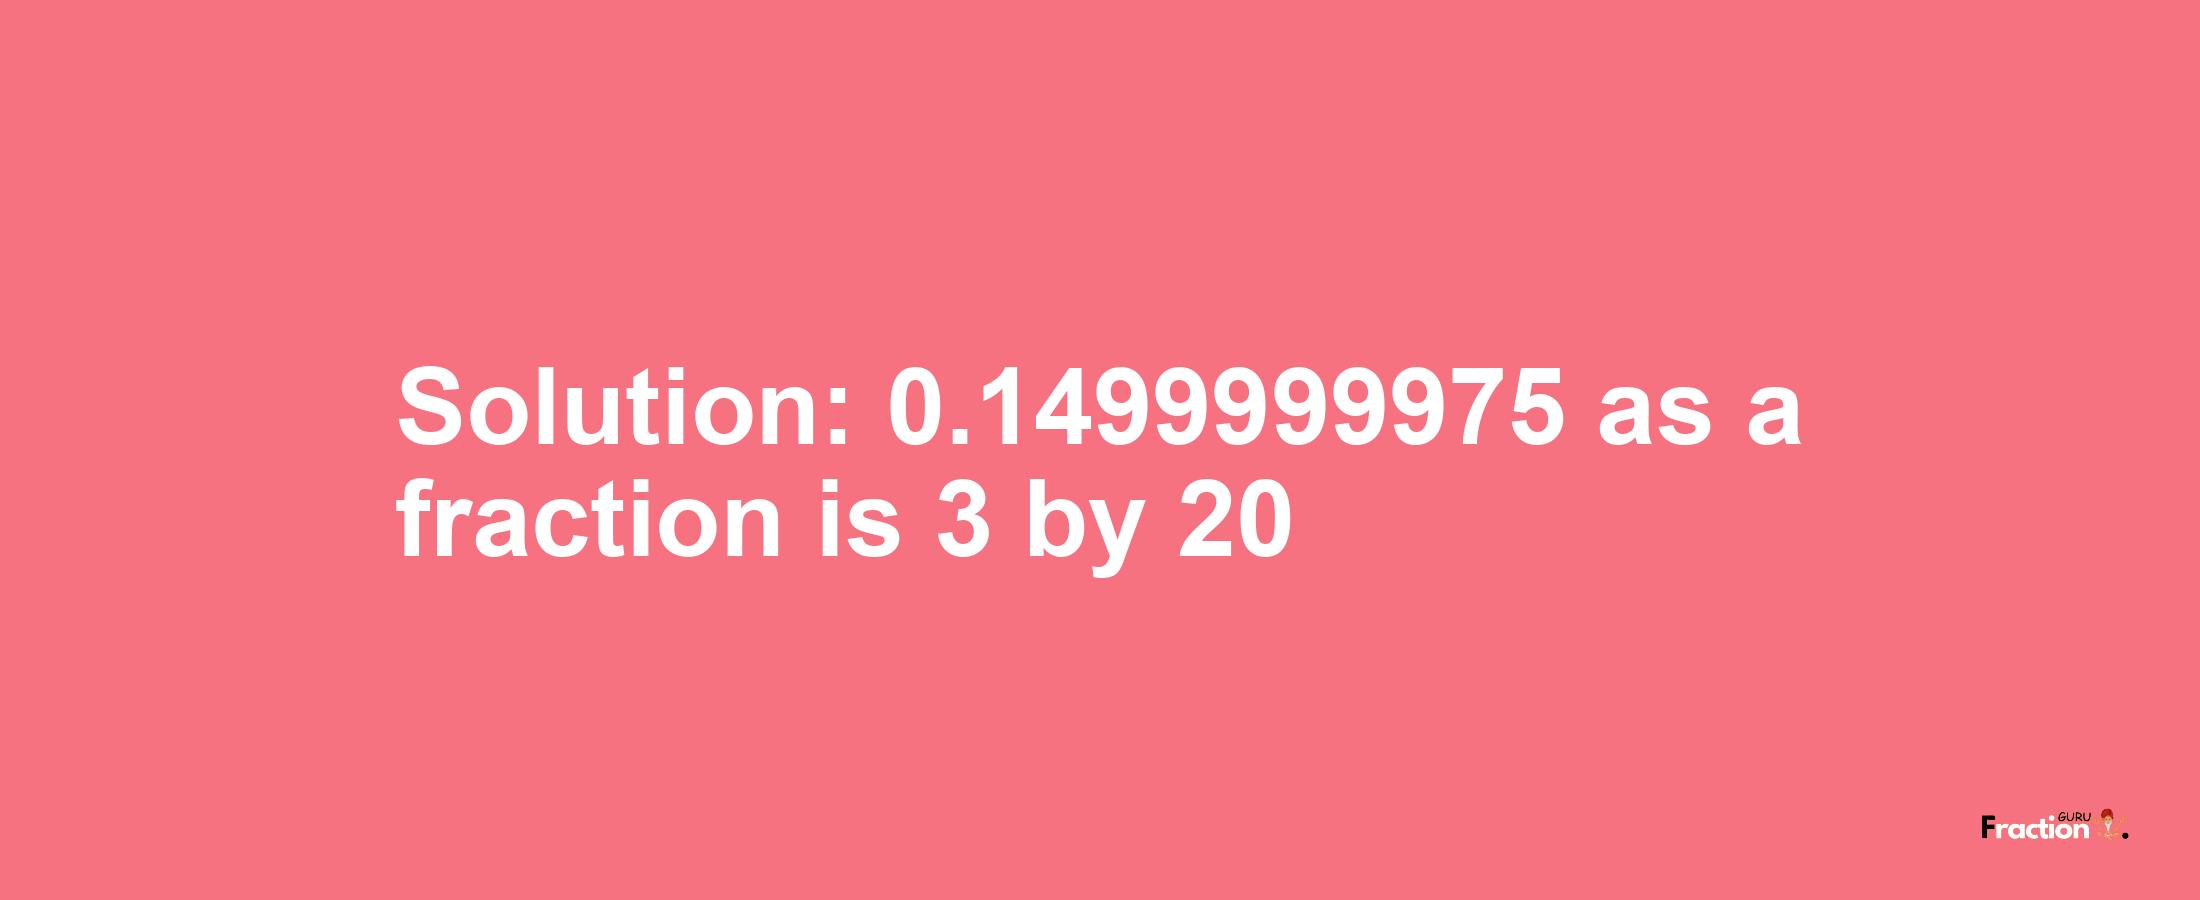 Solution:0.1499999975 as a fraction is 3/20